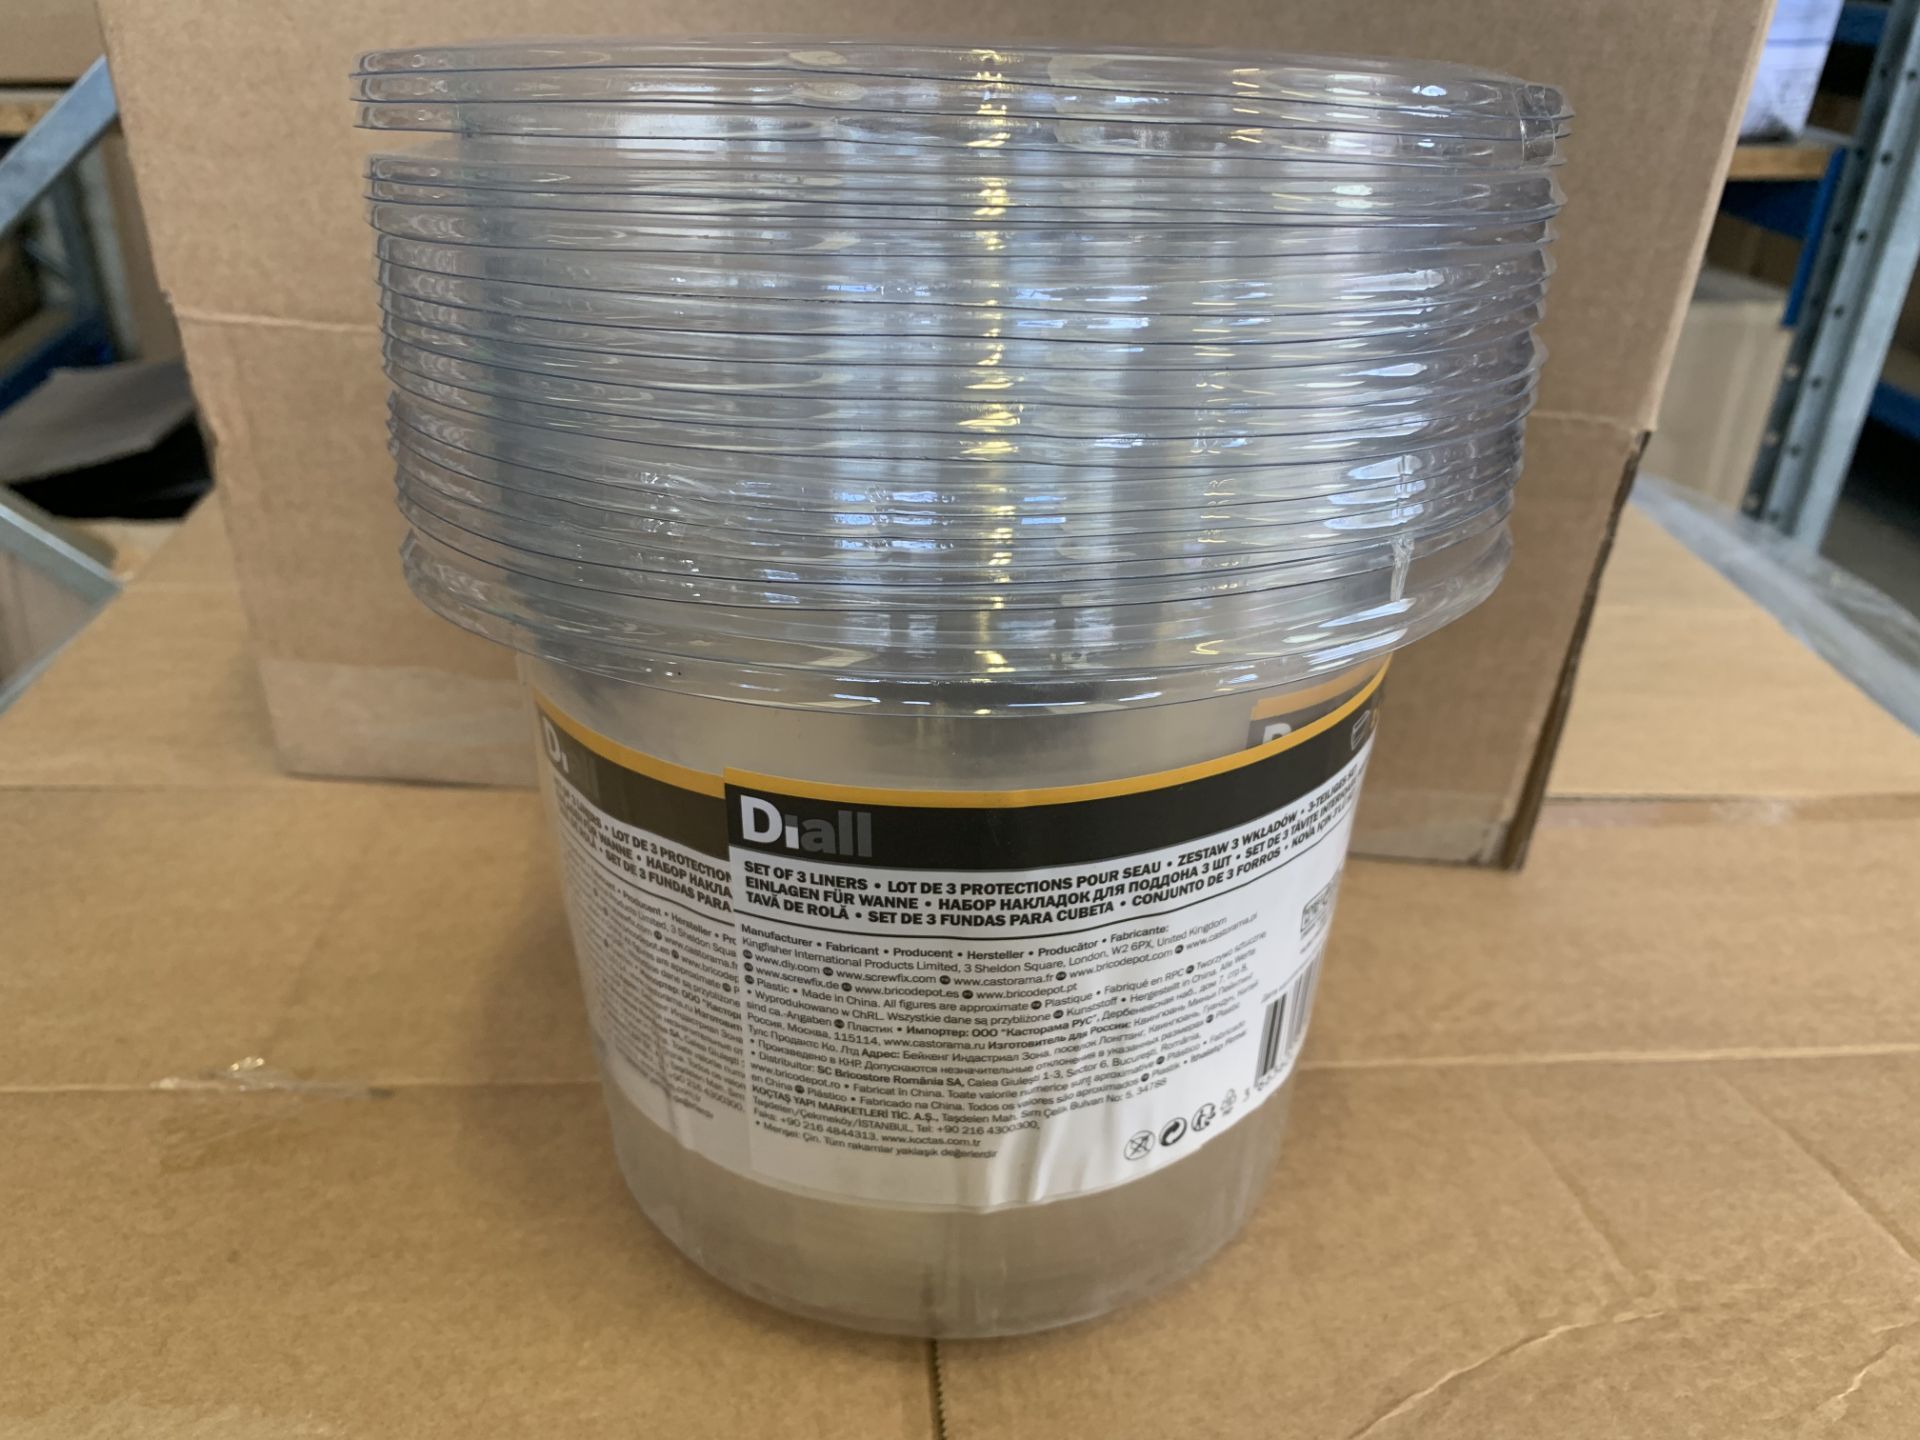 400 X BRAND NEW 2L DIALL LINERS (250/20)